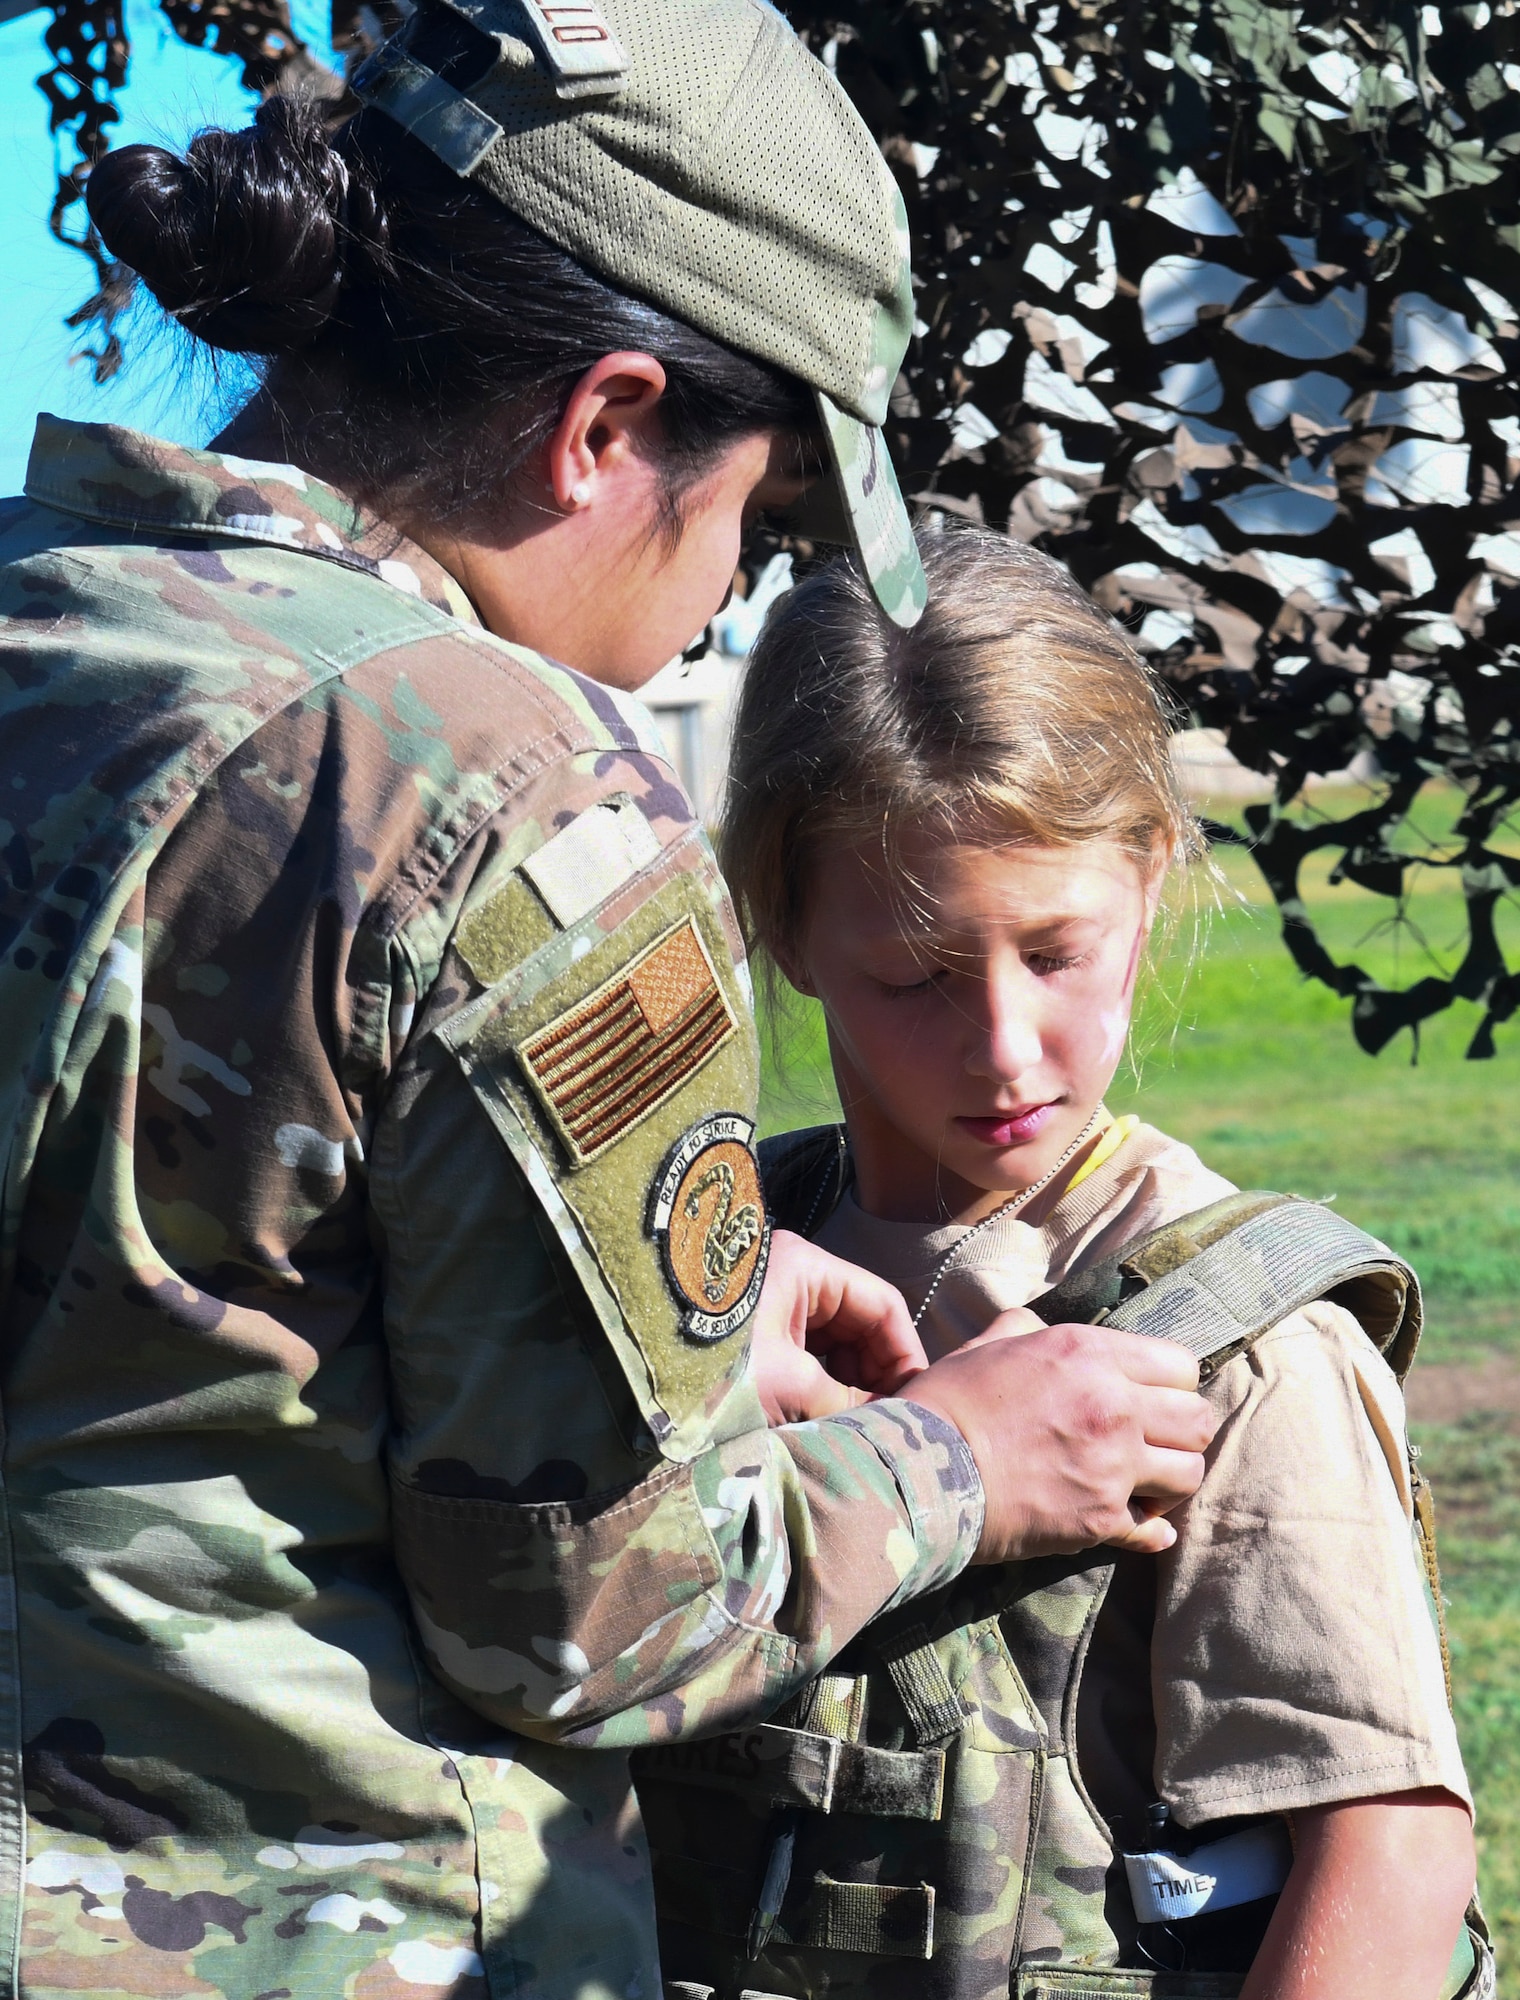 U.S. Air Force Airman 1st Class Karen Caraballo, 56th Security Forces Squadron defender, helps a military child put on protective gear during Operation Kids Investigating Deployment Services Nov. 13, 2021, at Luke Air Force Base, Arizona. Operation K.I.D.S. had similar aspects of a deployment within a simulated deployed location and included information booths with unit representatives from readiness, fire department, security forces, and aircraft maintenance.  The Airman and Family Readiness Center takes care of Airmen and their families by providing educational resources and holding events such as Operation K.I.D.S., which gives children a better understanding of their parents’ sacrifice and dedication, and allows a dialog within families about deployments. (U.S. Air Force photo by Tech. Sgt. Amber Carter)